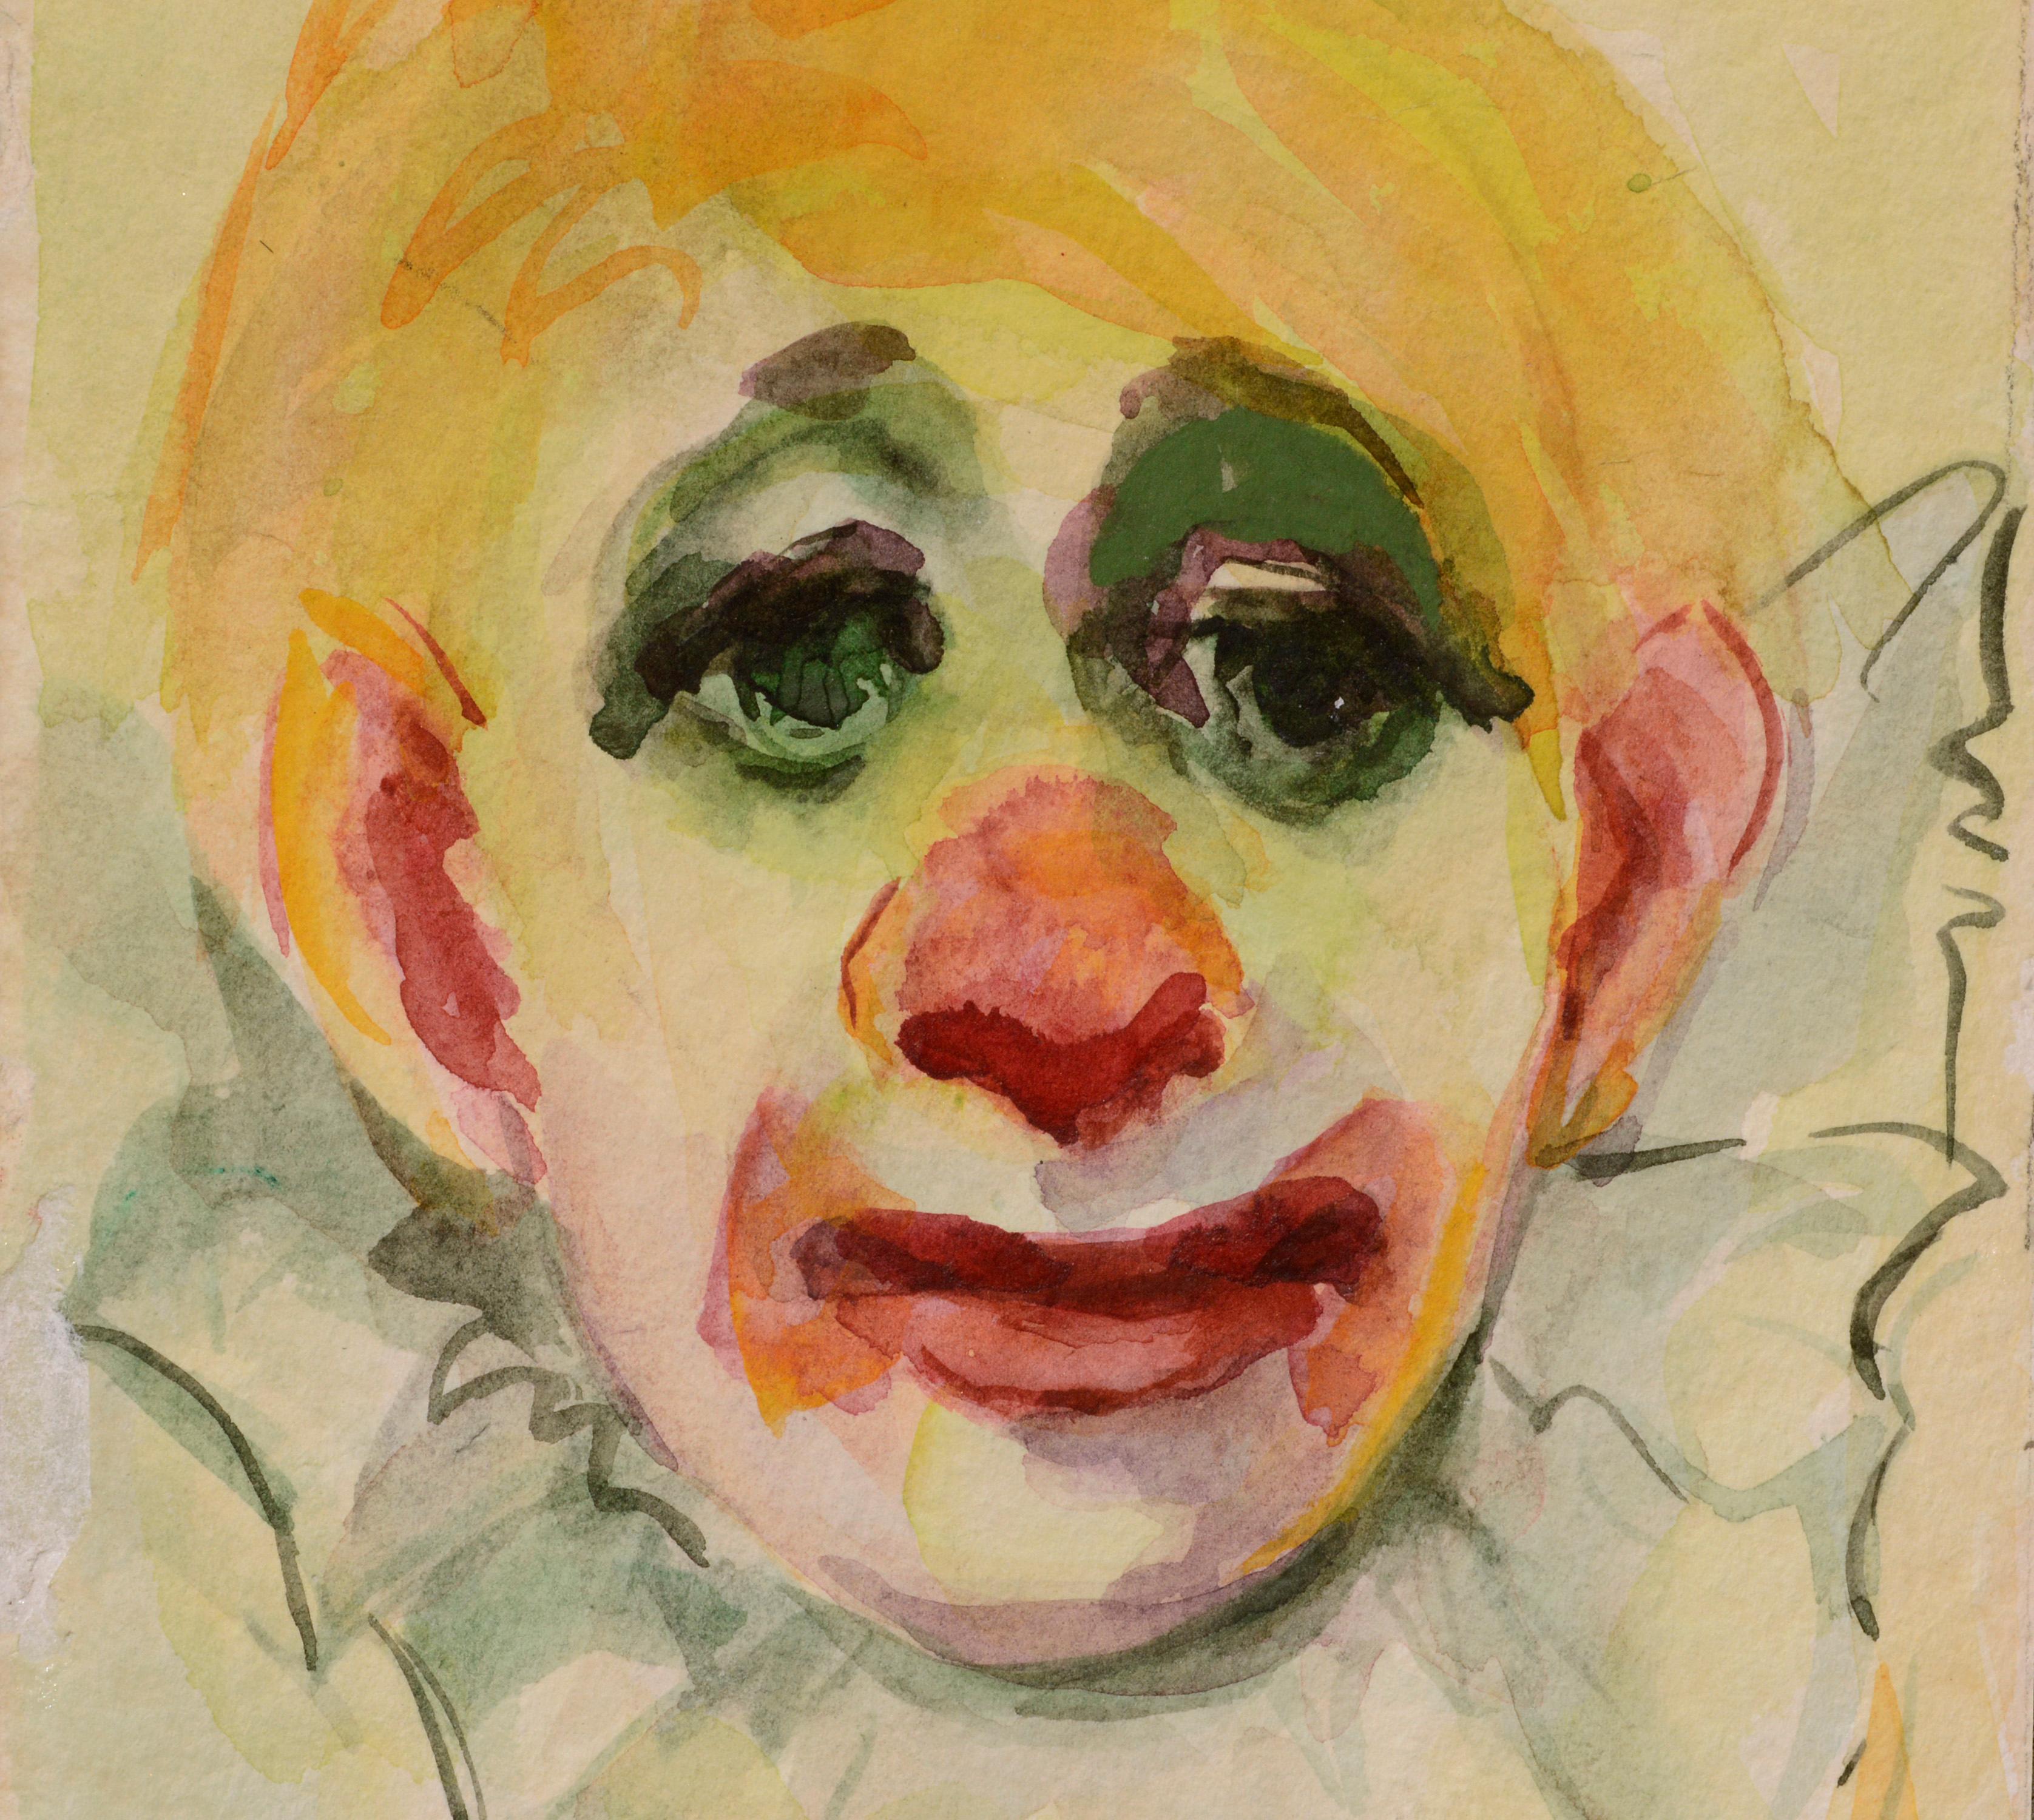 Clown Portrait #6 - Painting by Marjorie May Blake